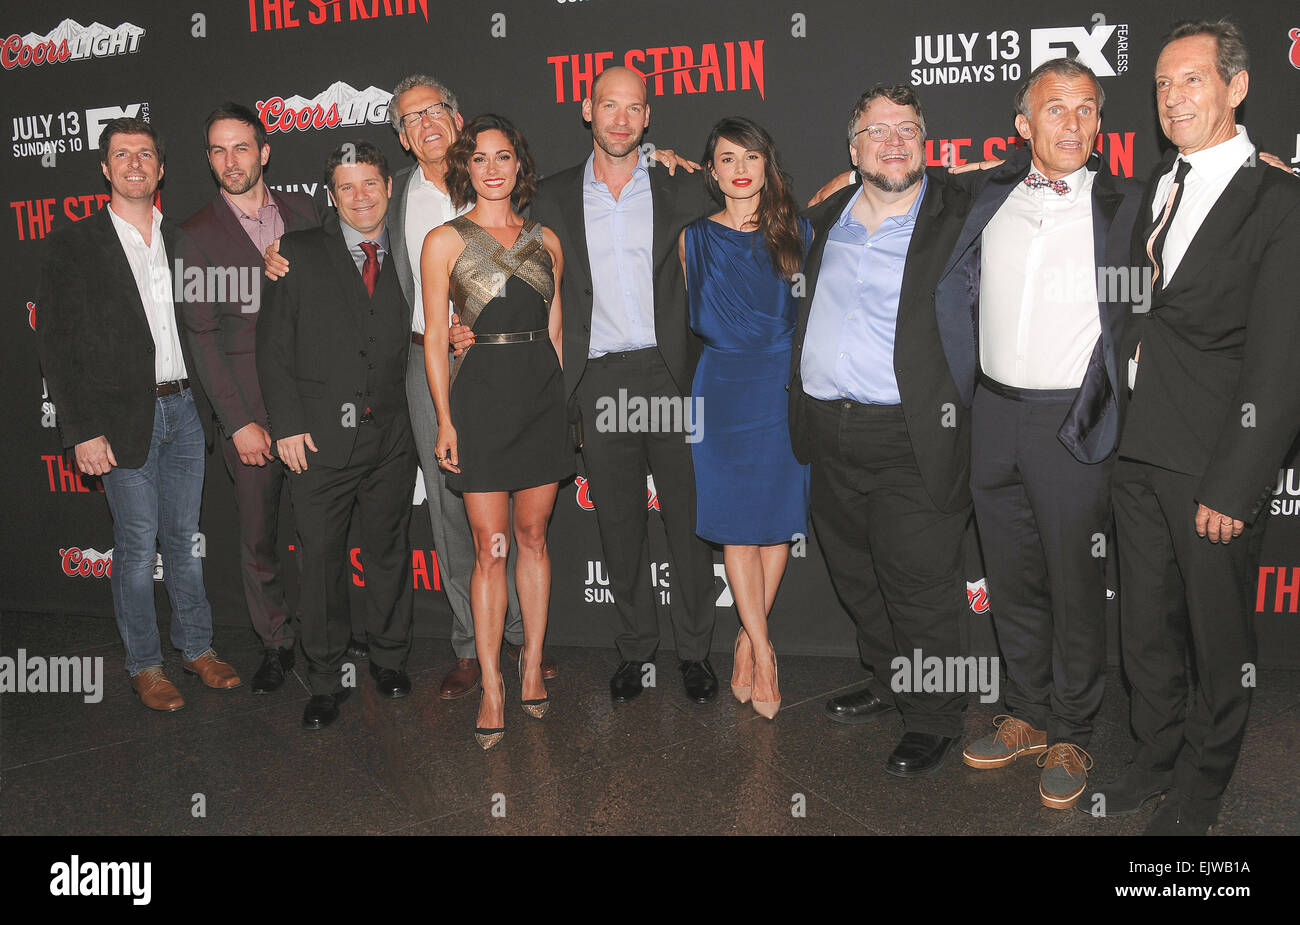 FX's new series 'The Strain' Los Angeles premiere - Arrivals Featuring:  Cast of "The Strain" Where: Los Angeles, California, United States When: 11  Jul 2014 Stock Photo - Alamy